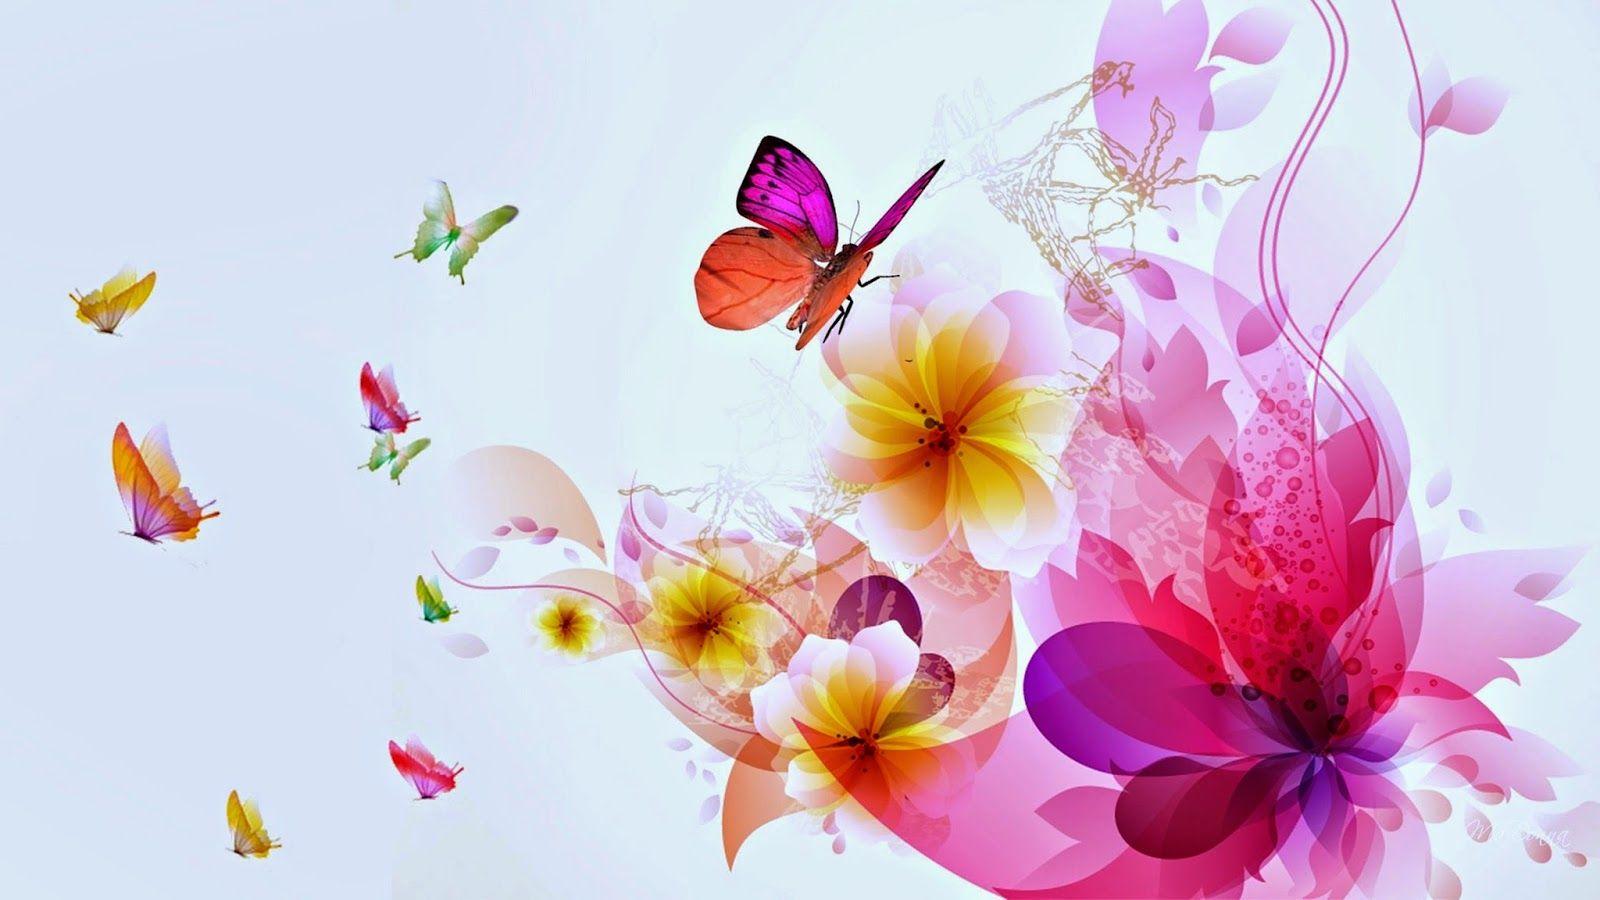 Colorful Butterfly designs background for desktop Abstract HD wallpaper